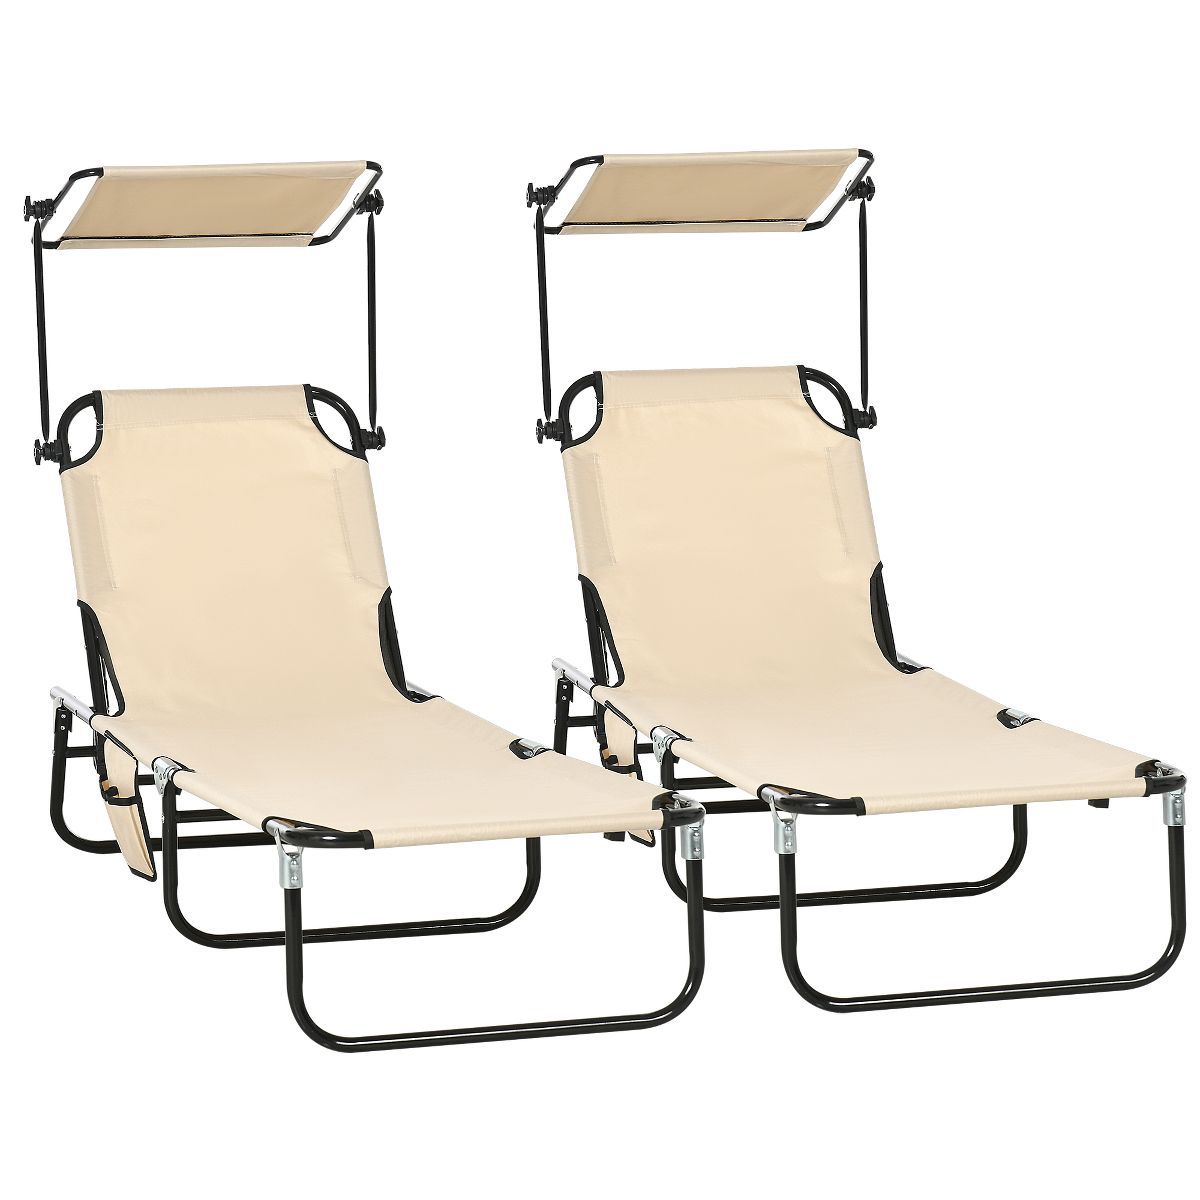 Outsunny Folding Chaise Lounge Pool Chairs, Set of 2 Outdoor Sun Tanning Chairs with Sunshade, Fi... | Target